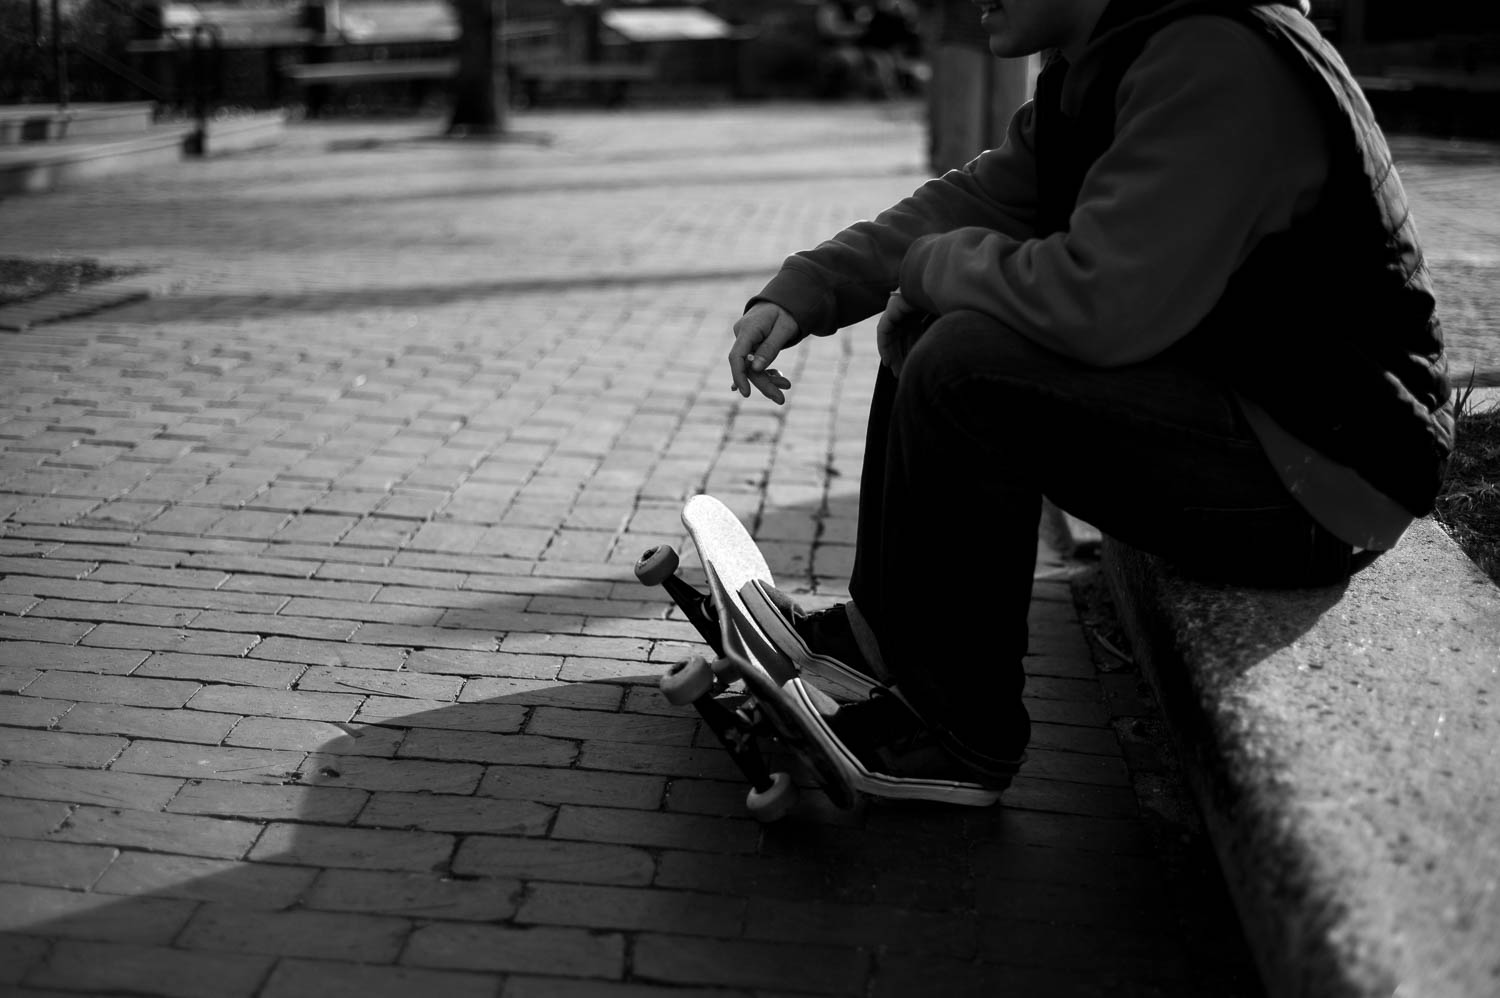 A black and white photo of a skateboarder smoking a cigarette